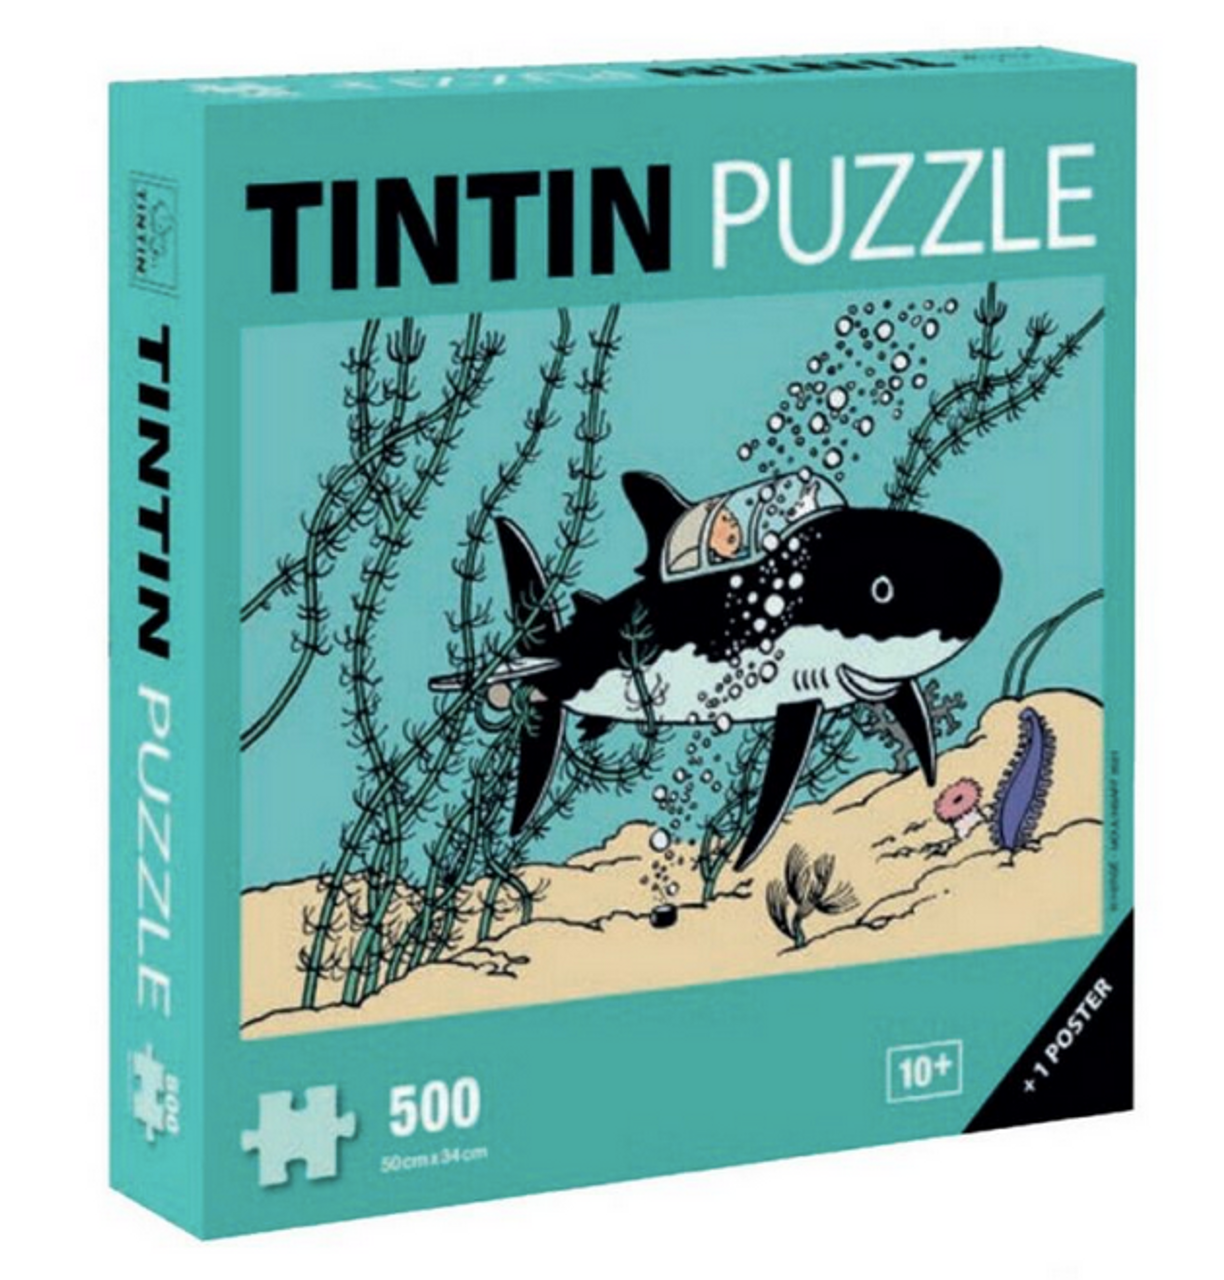 OCT121840 - TINTIN TREASURES OF MARLINSPIKE PUZZLE - Previews World